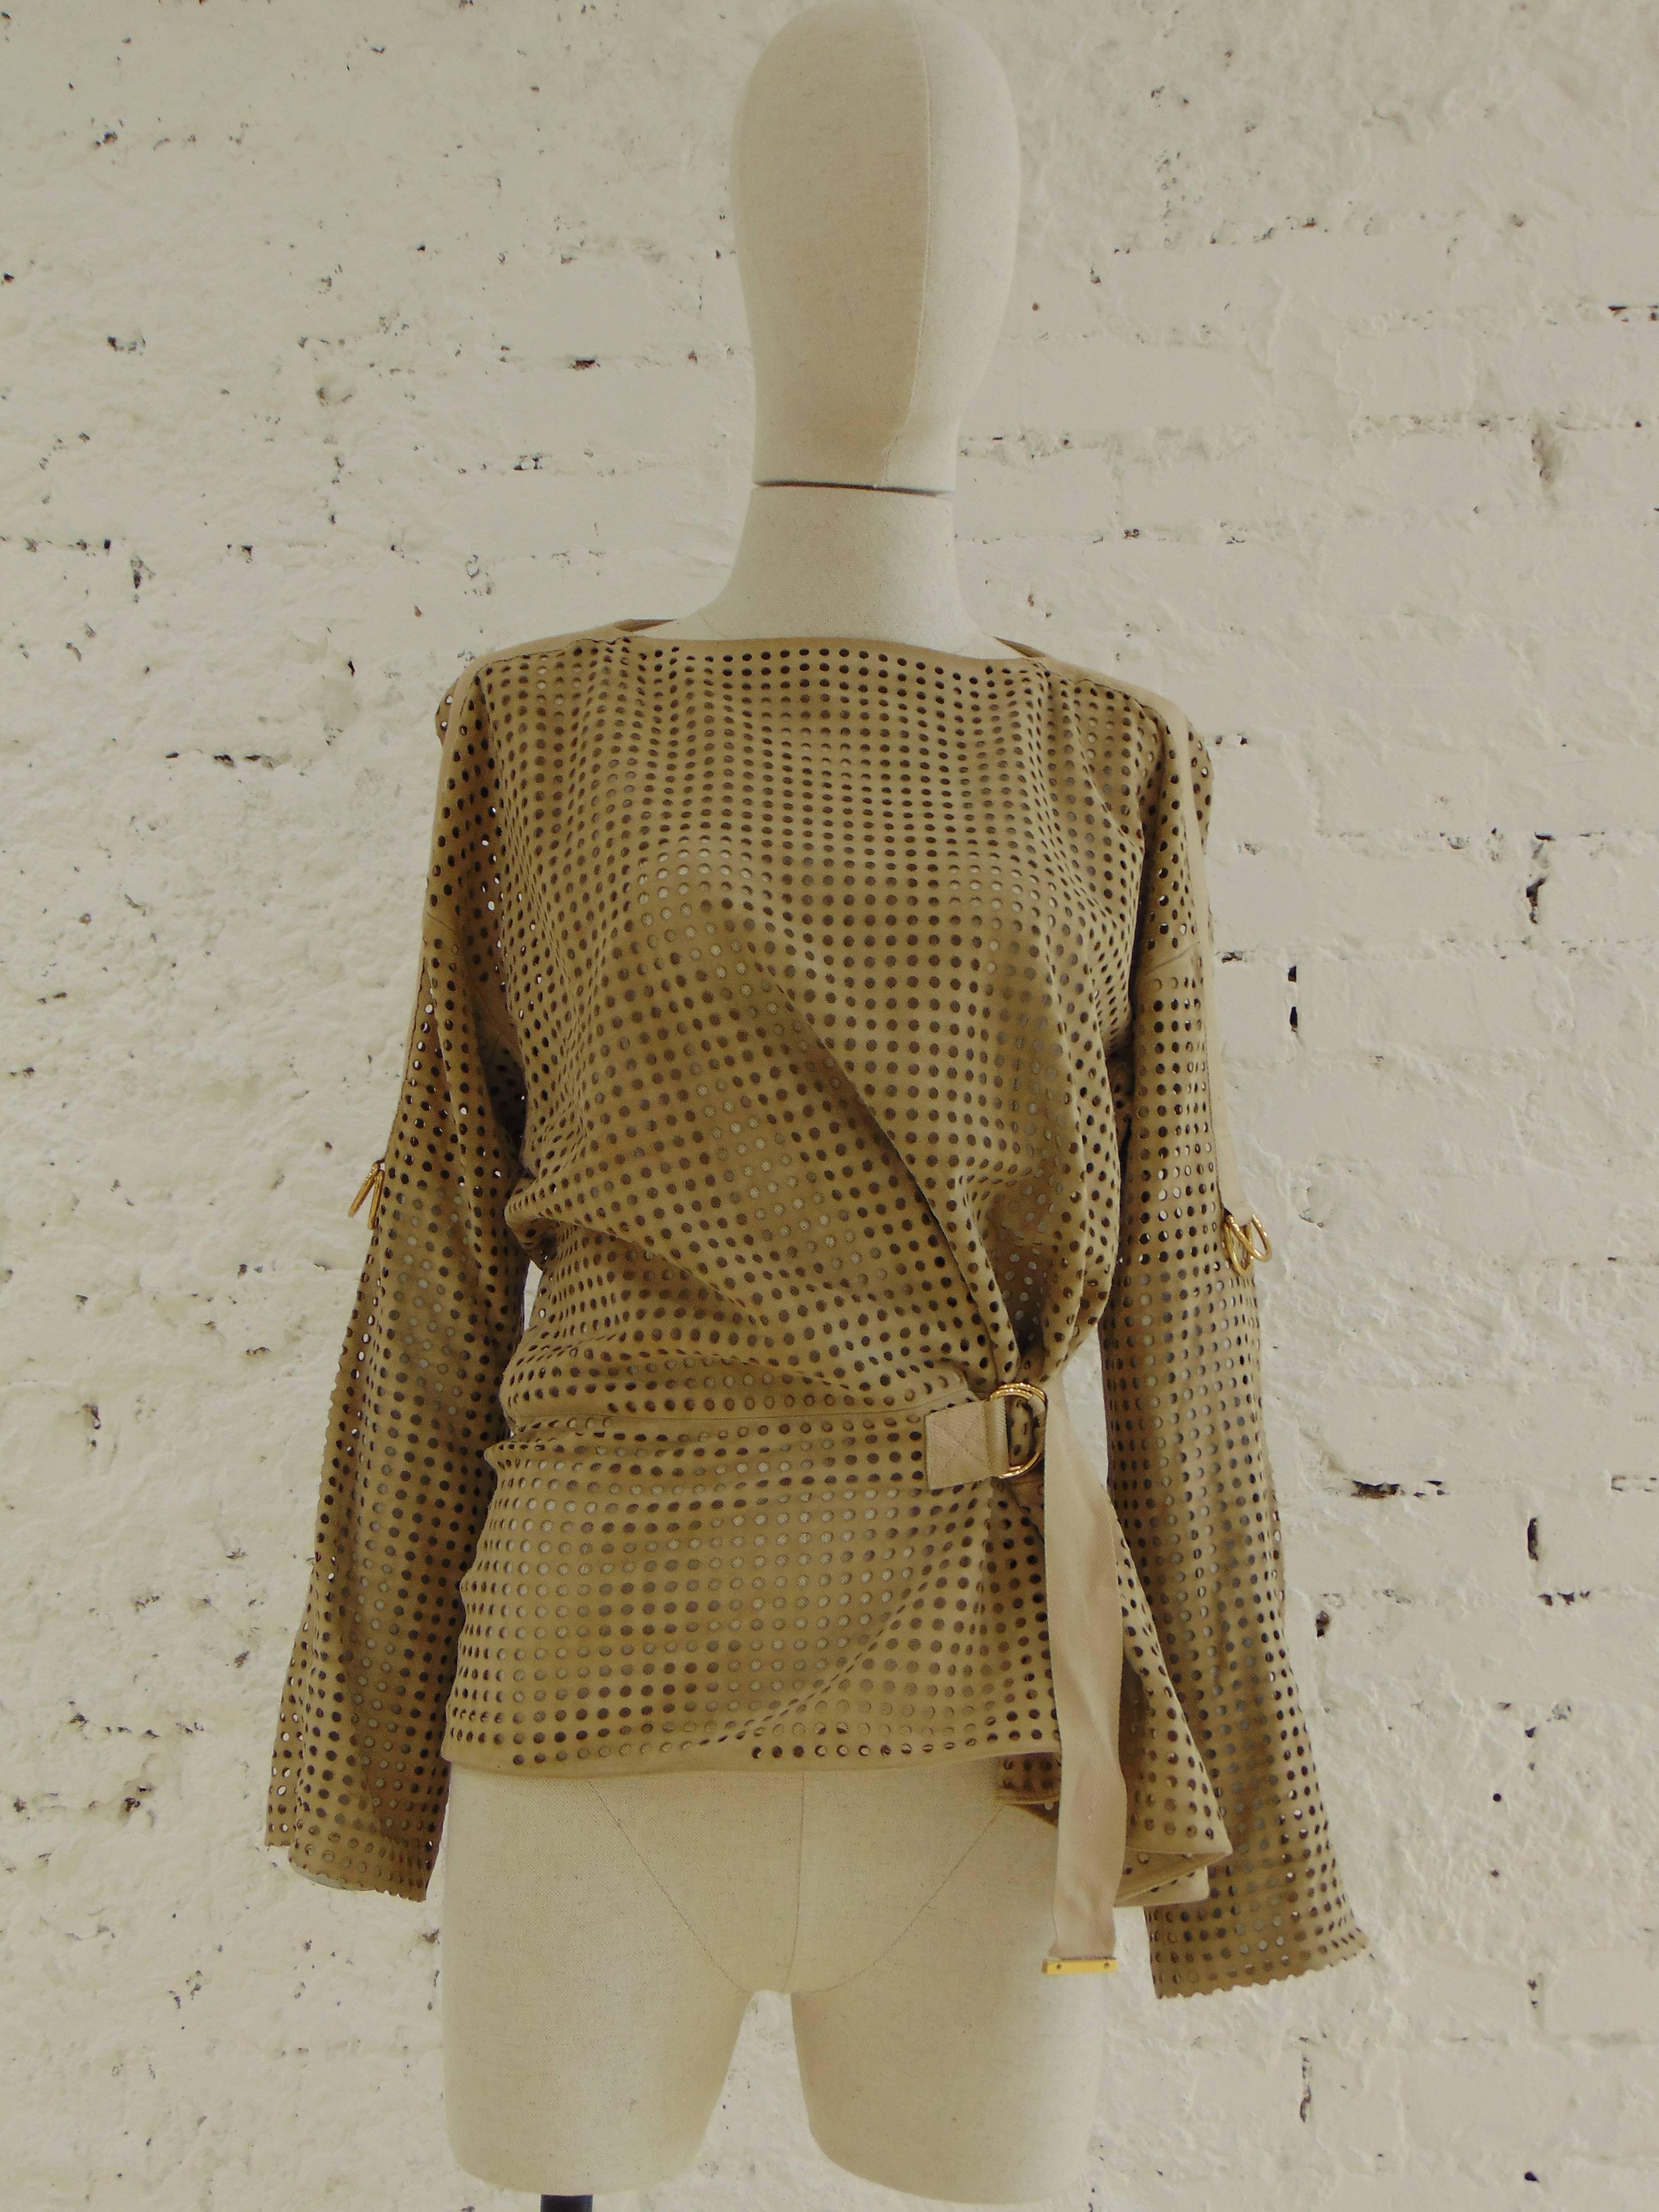 Tom Ford beije leather shirt 

perforated leather in beije nude tone shirt
totally madei n italy in size 44
embellished with gold tone hardware belt closure
